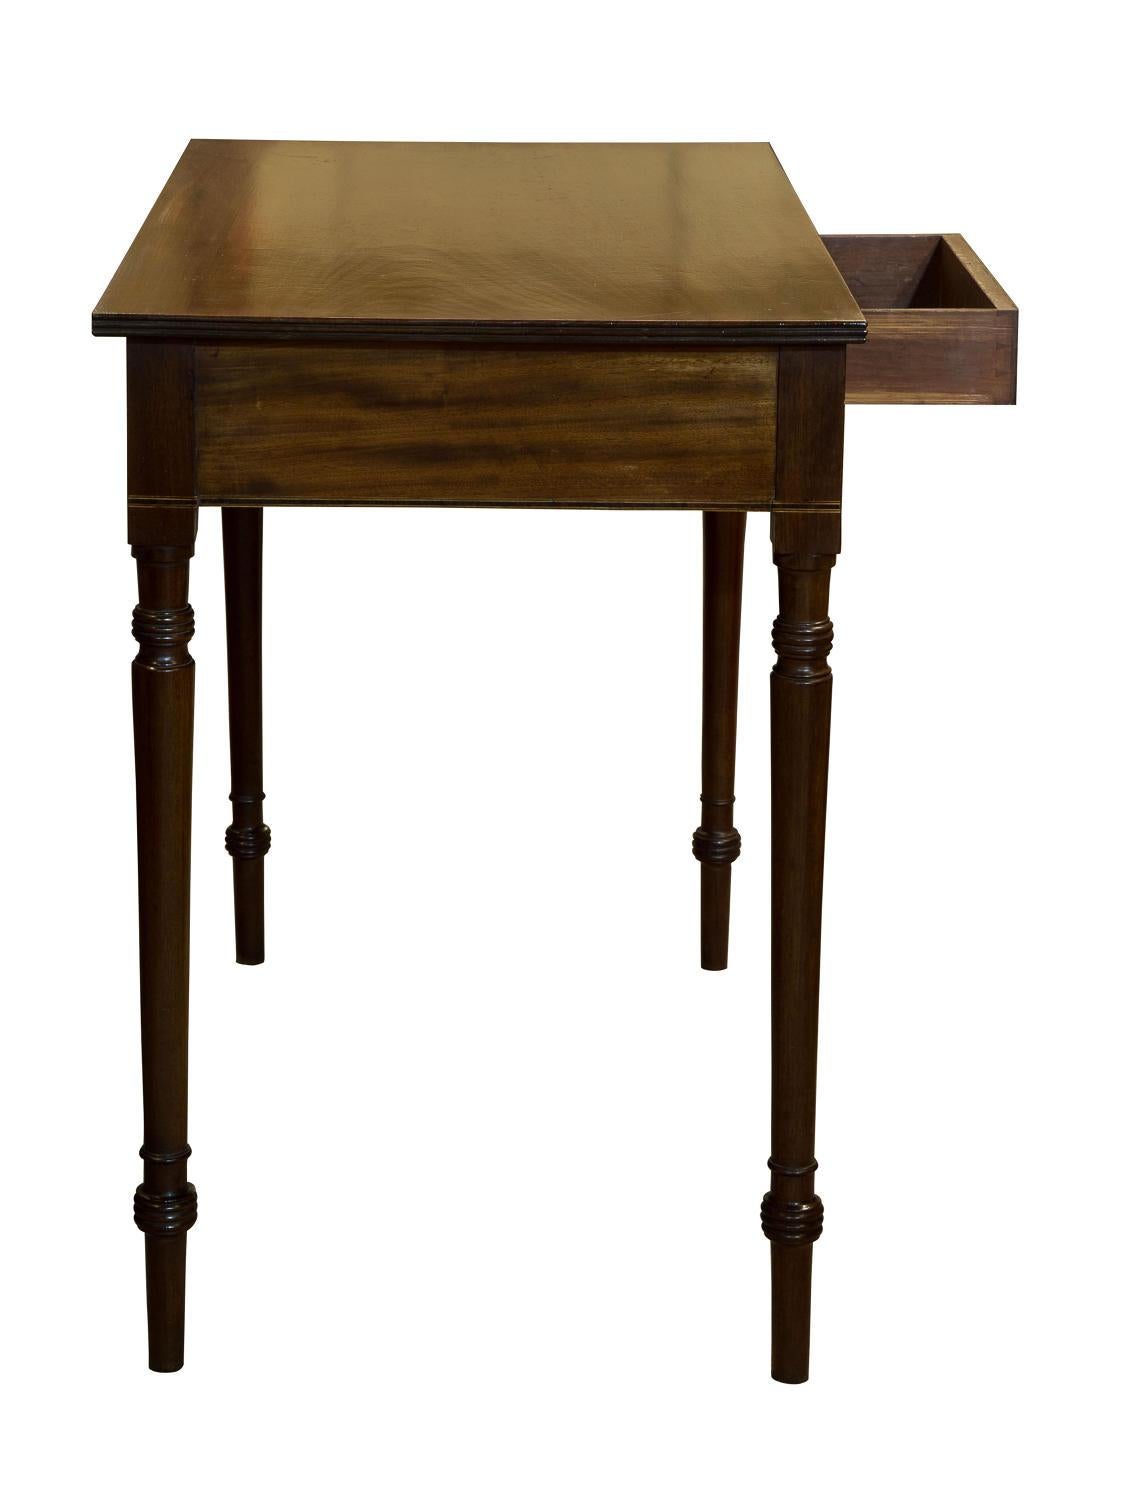 English 18th Century Mahogany Side Table with Drawer, circa 1790 For Sale